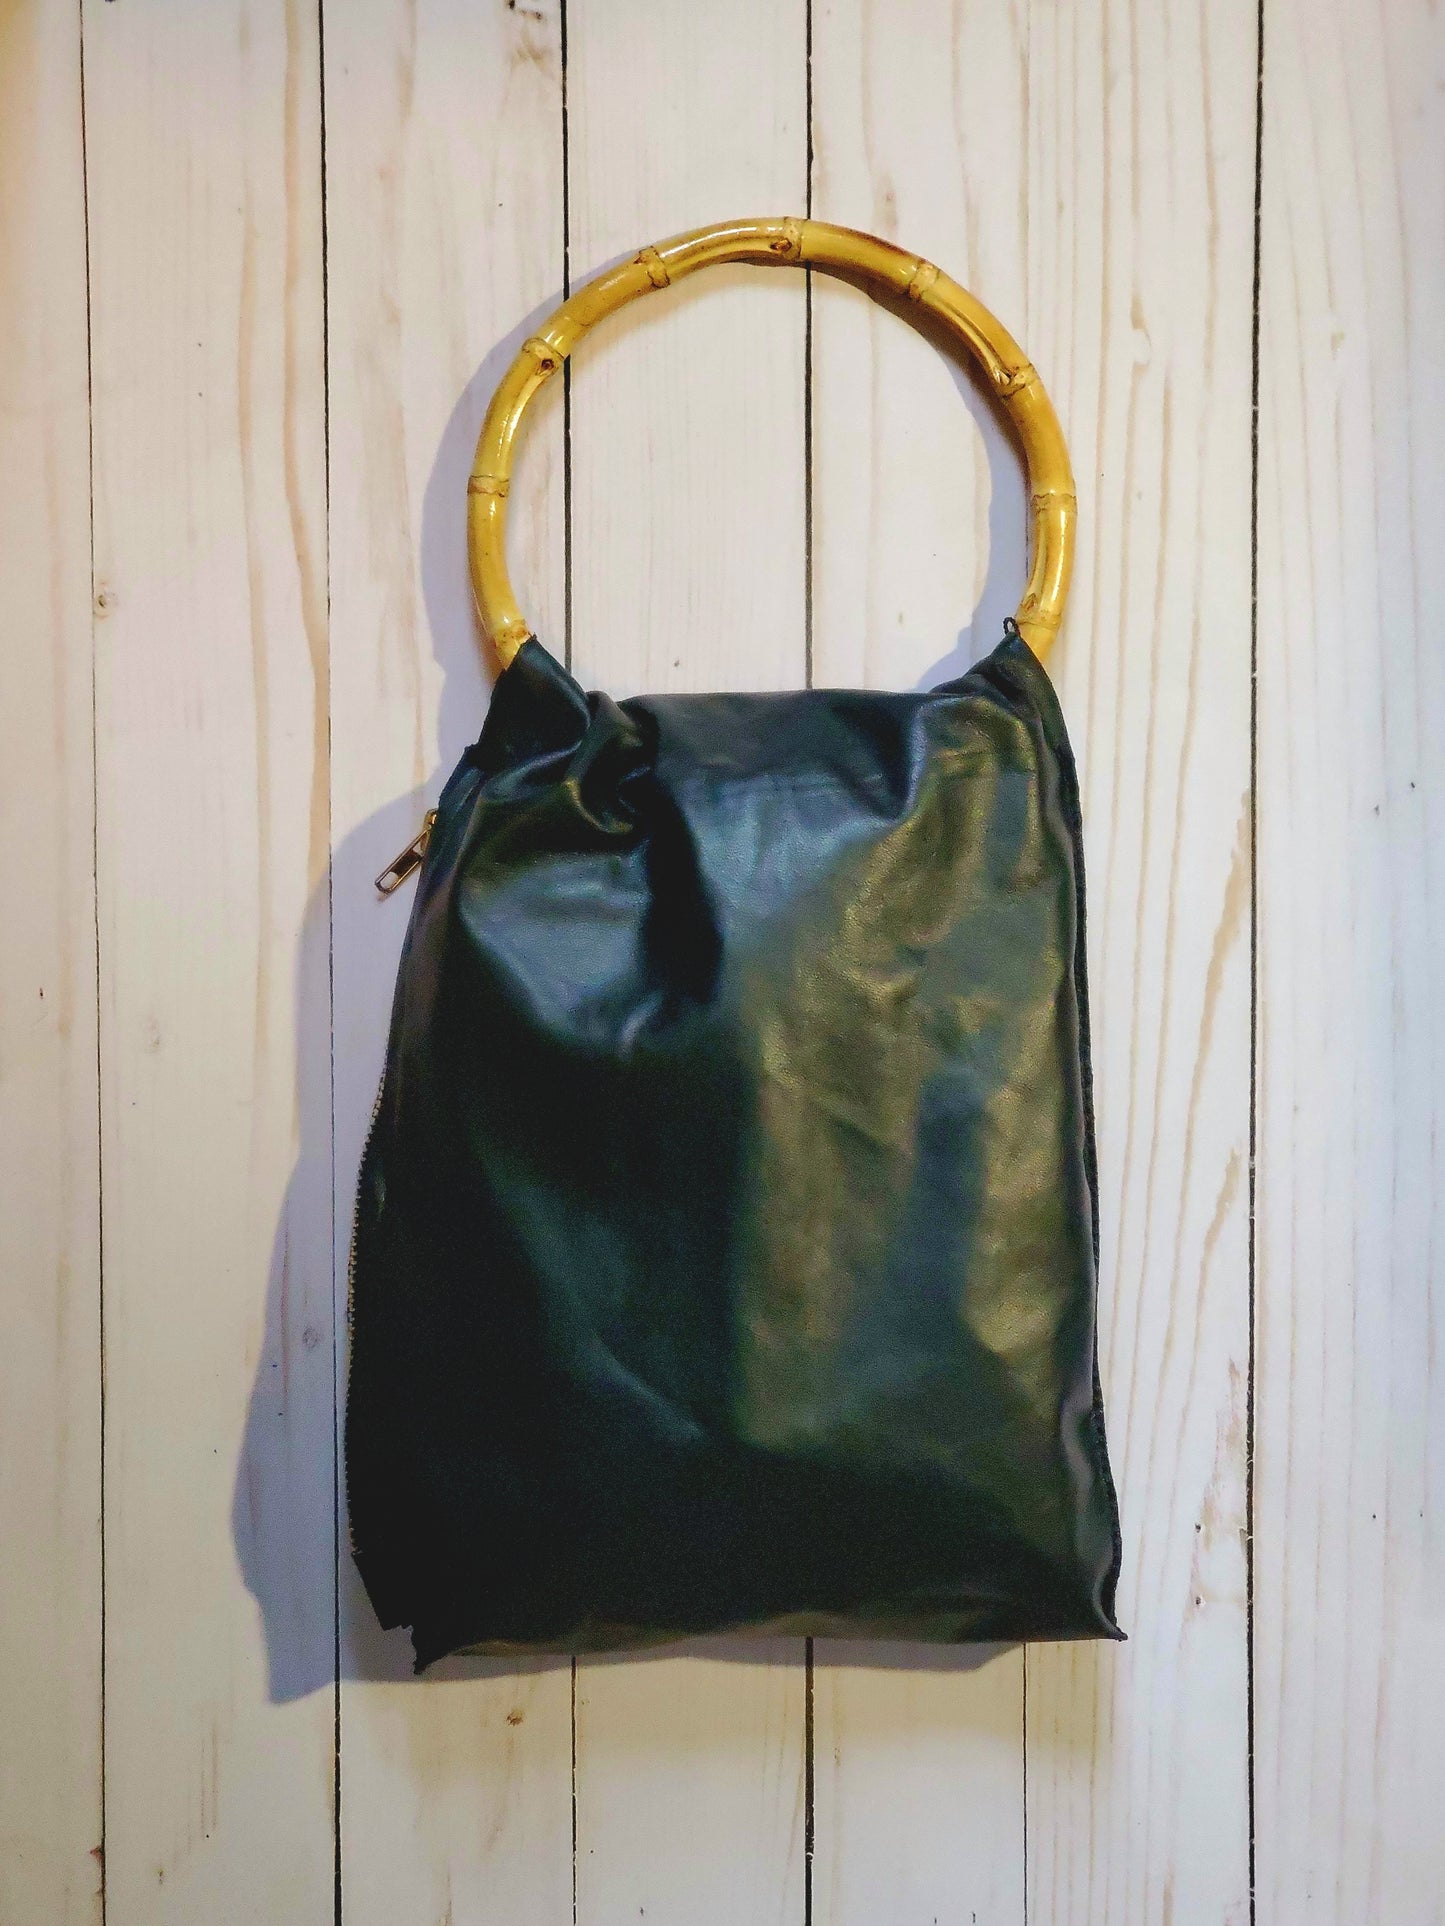 Bamboo 4 inch round handle black leather bag with a side zipper. Handmade in Los Angeles, California